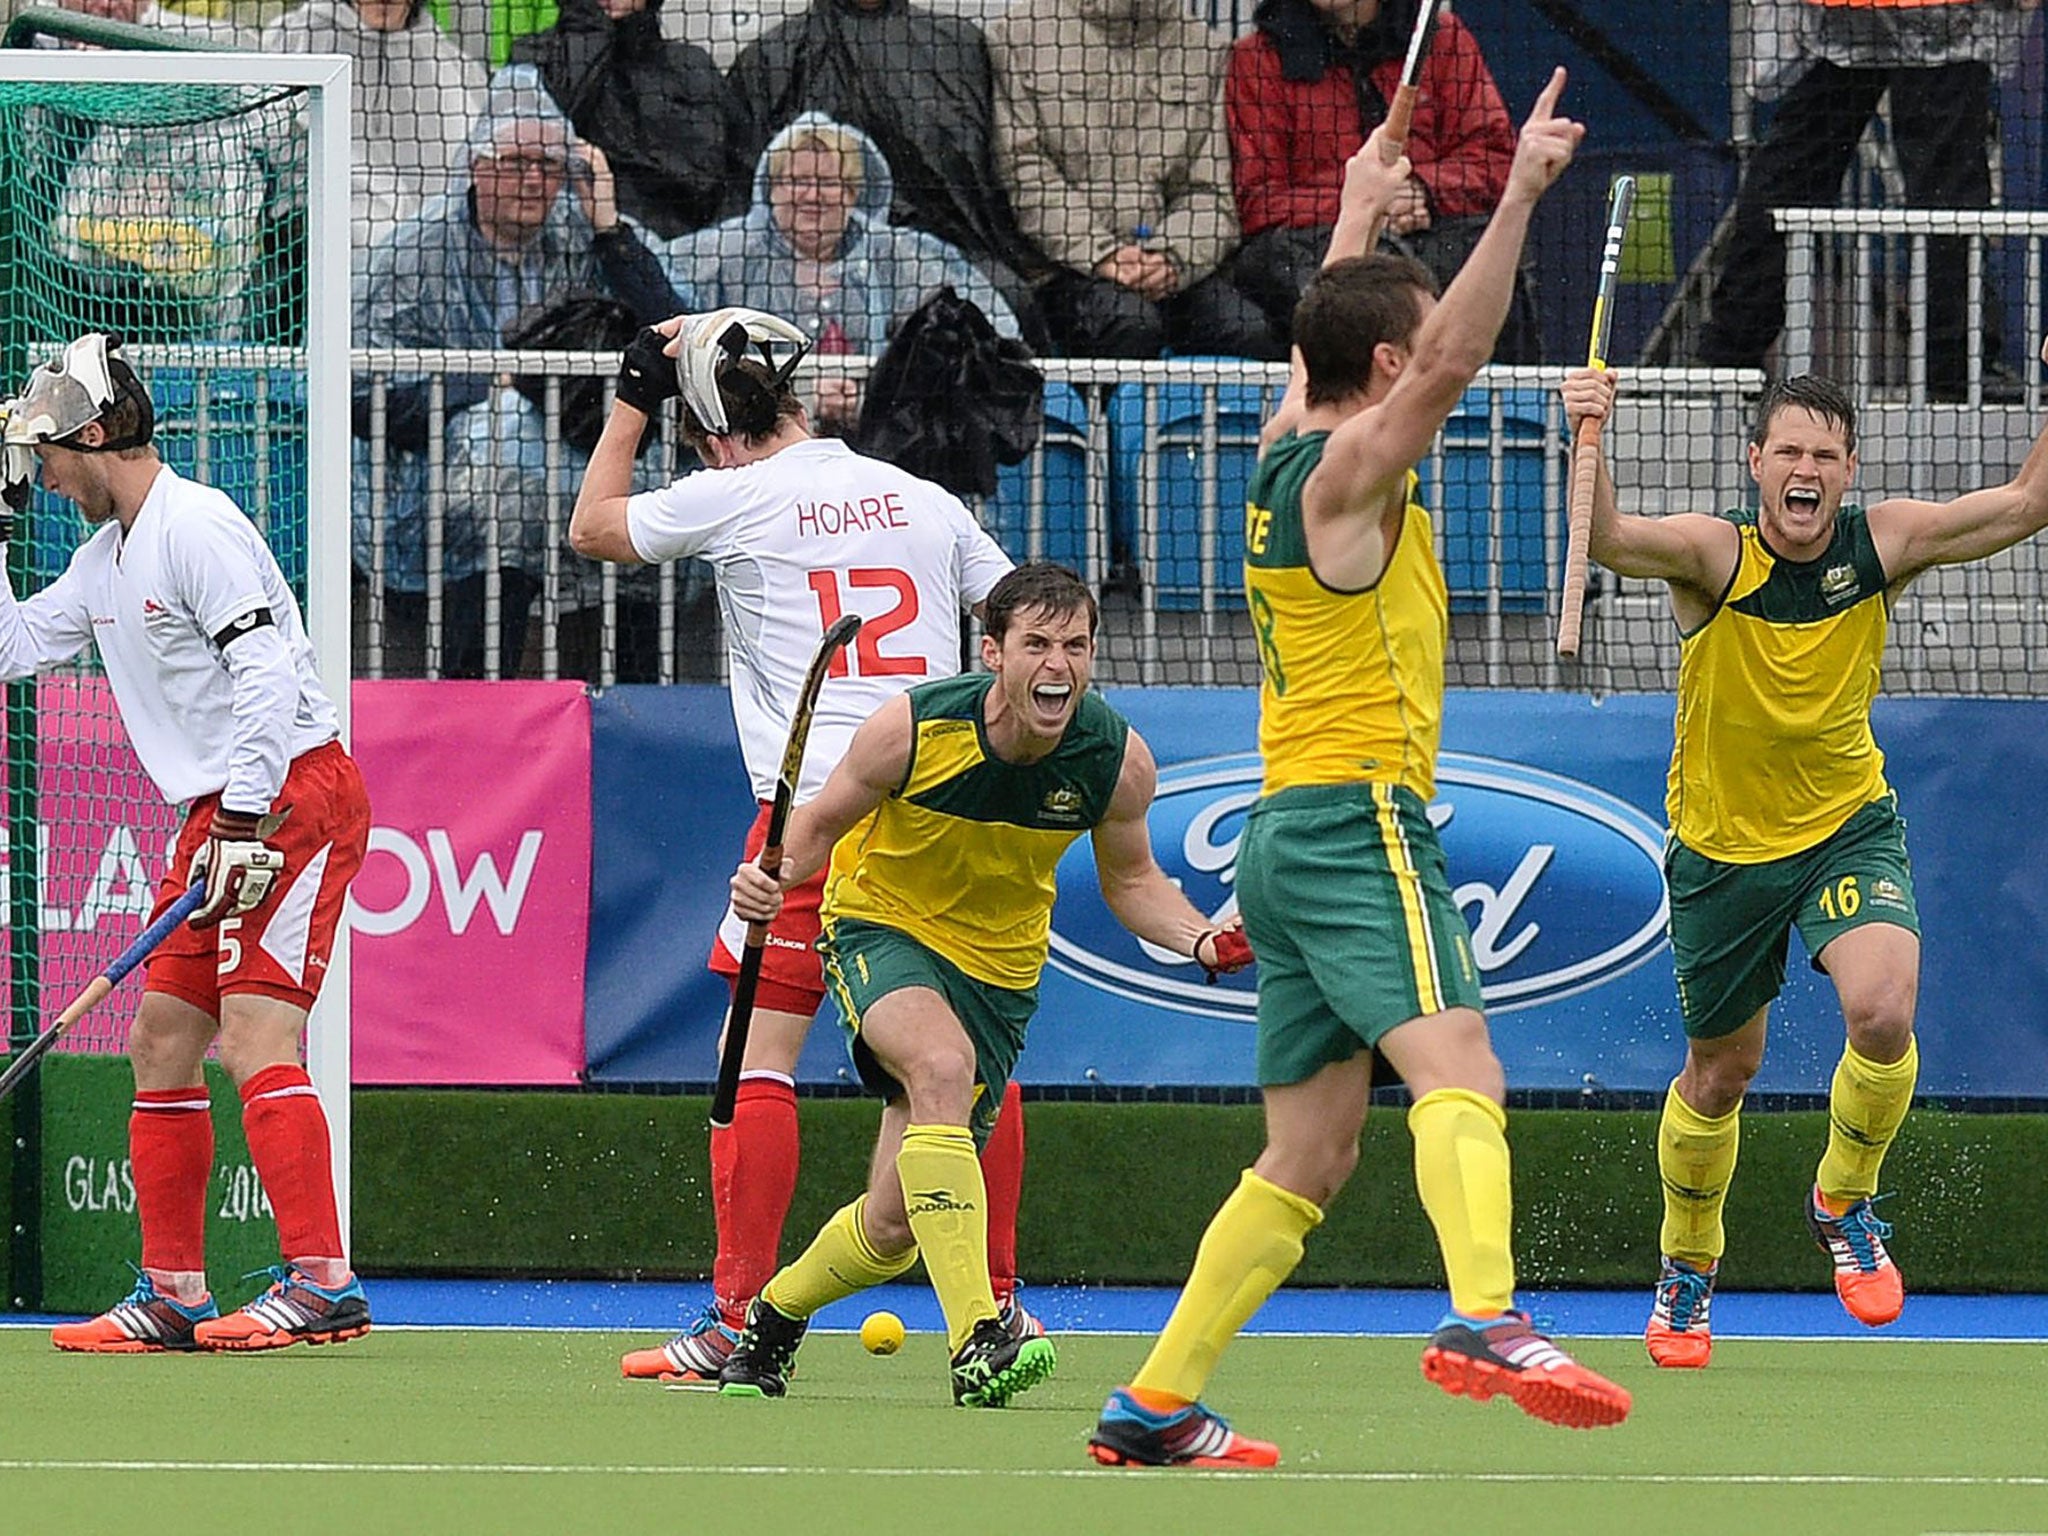 Australia players raise their arms in delight as another goal puts the match beyond England and a place in the final is secured